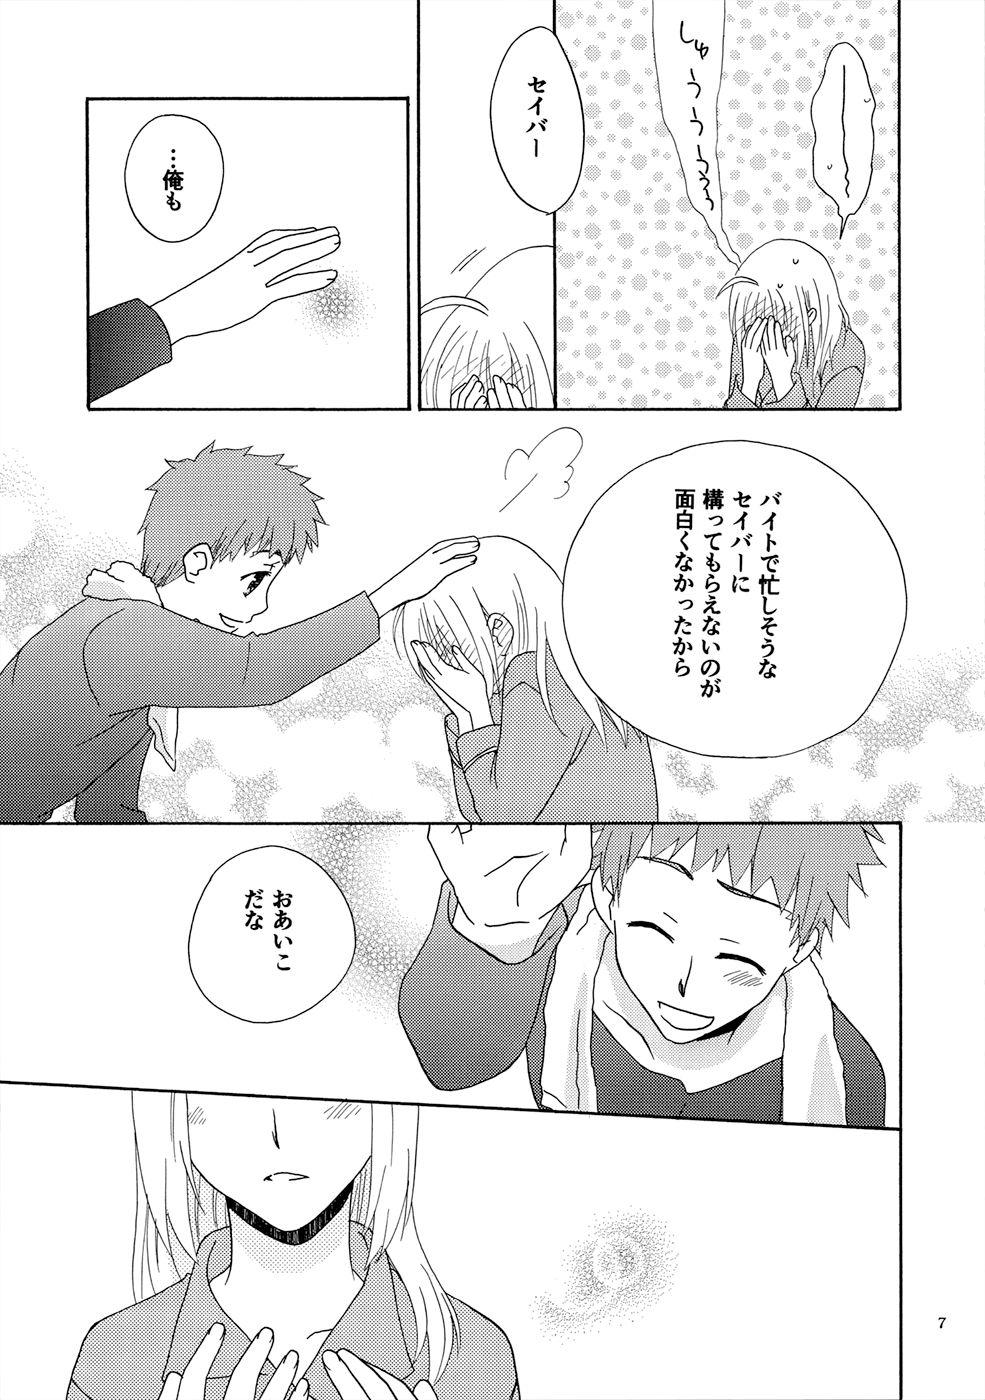 Fingers POP STAR - Fate stay night Realsex - Page 6